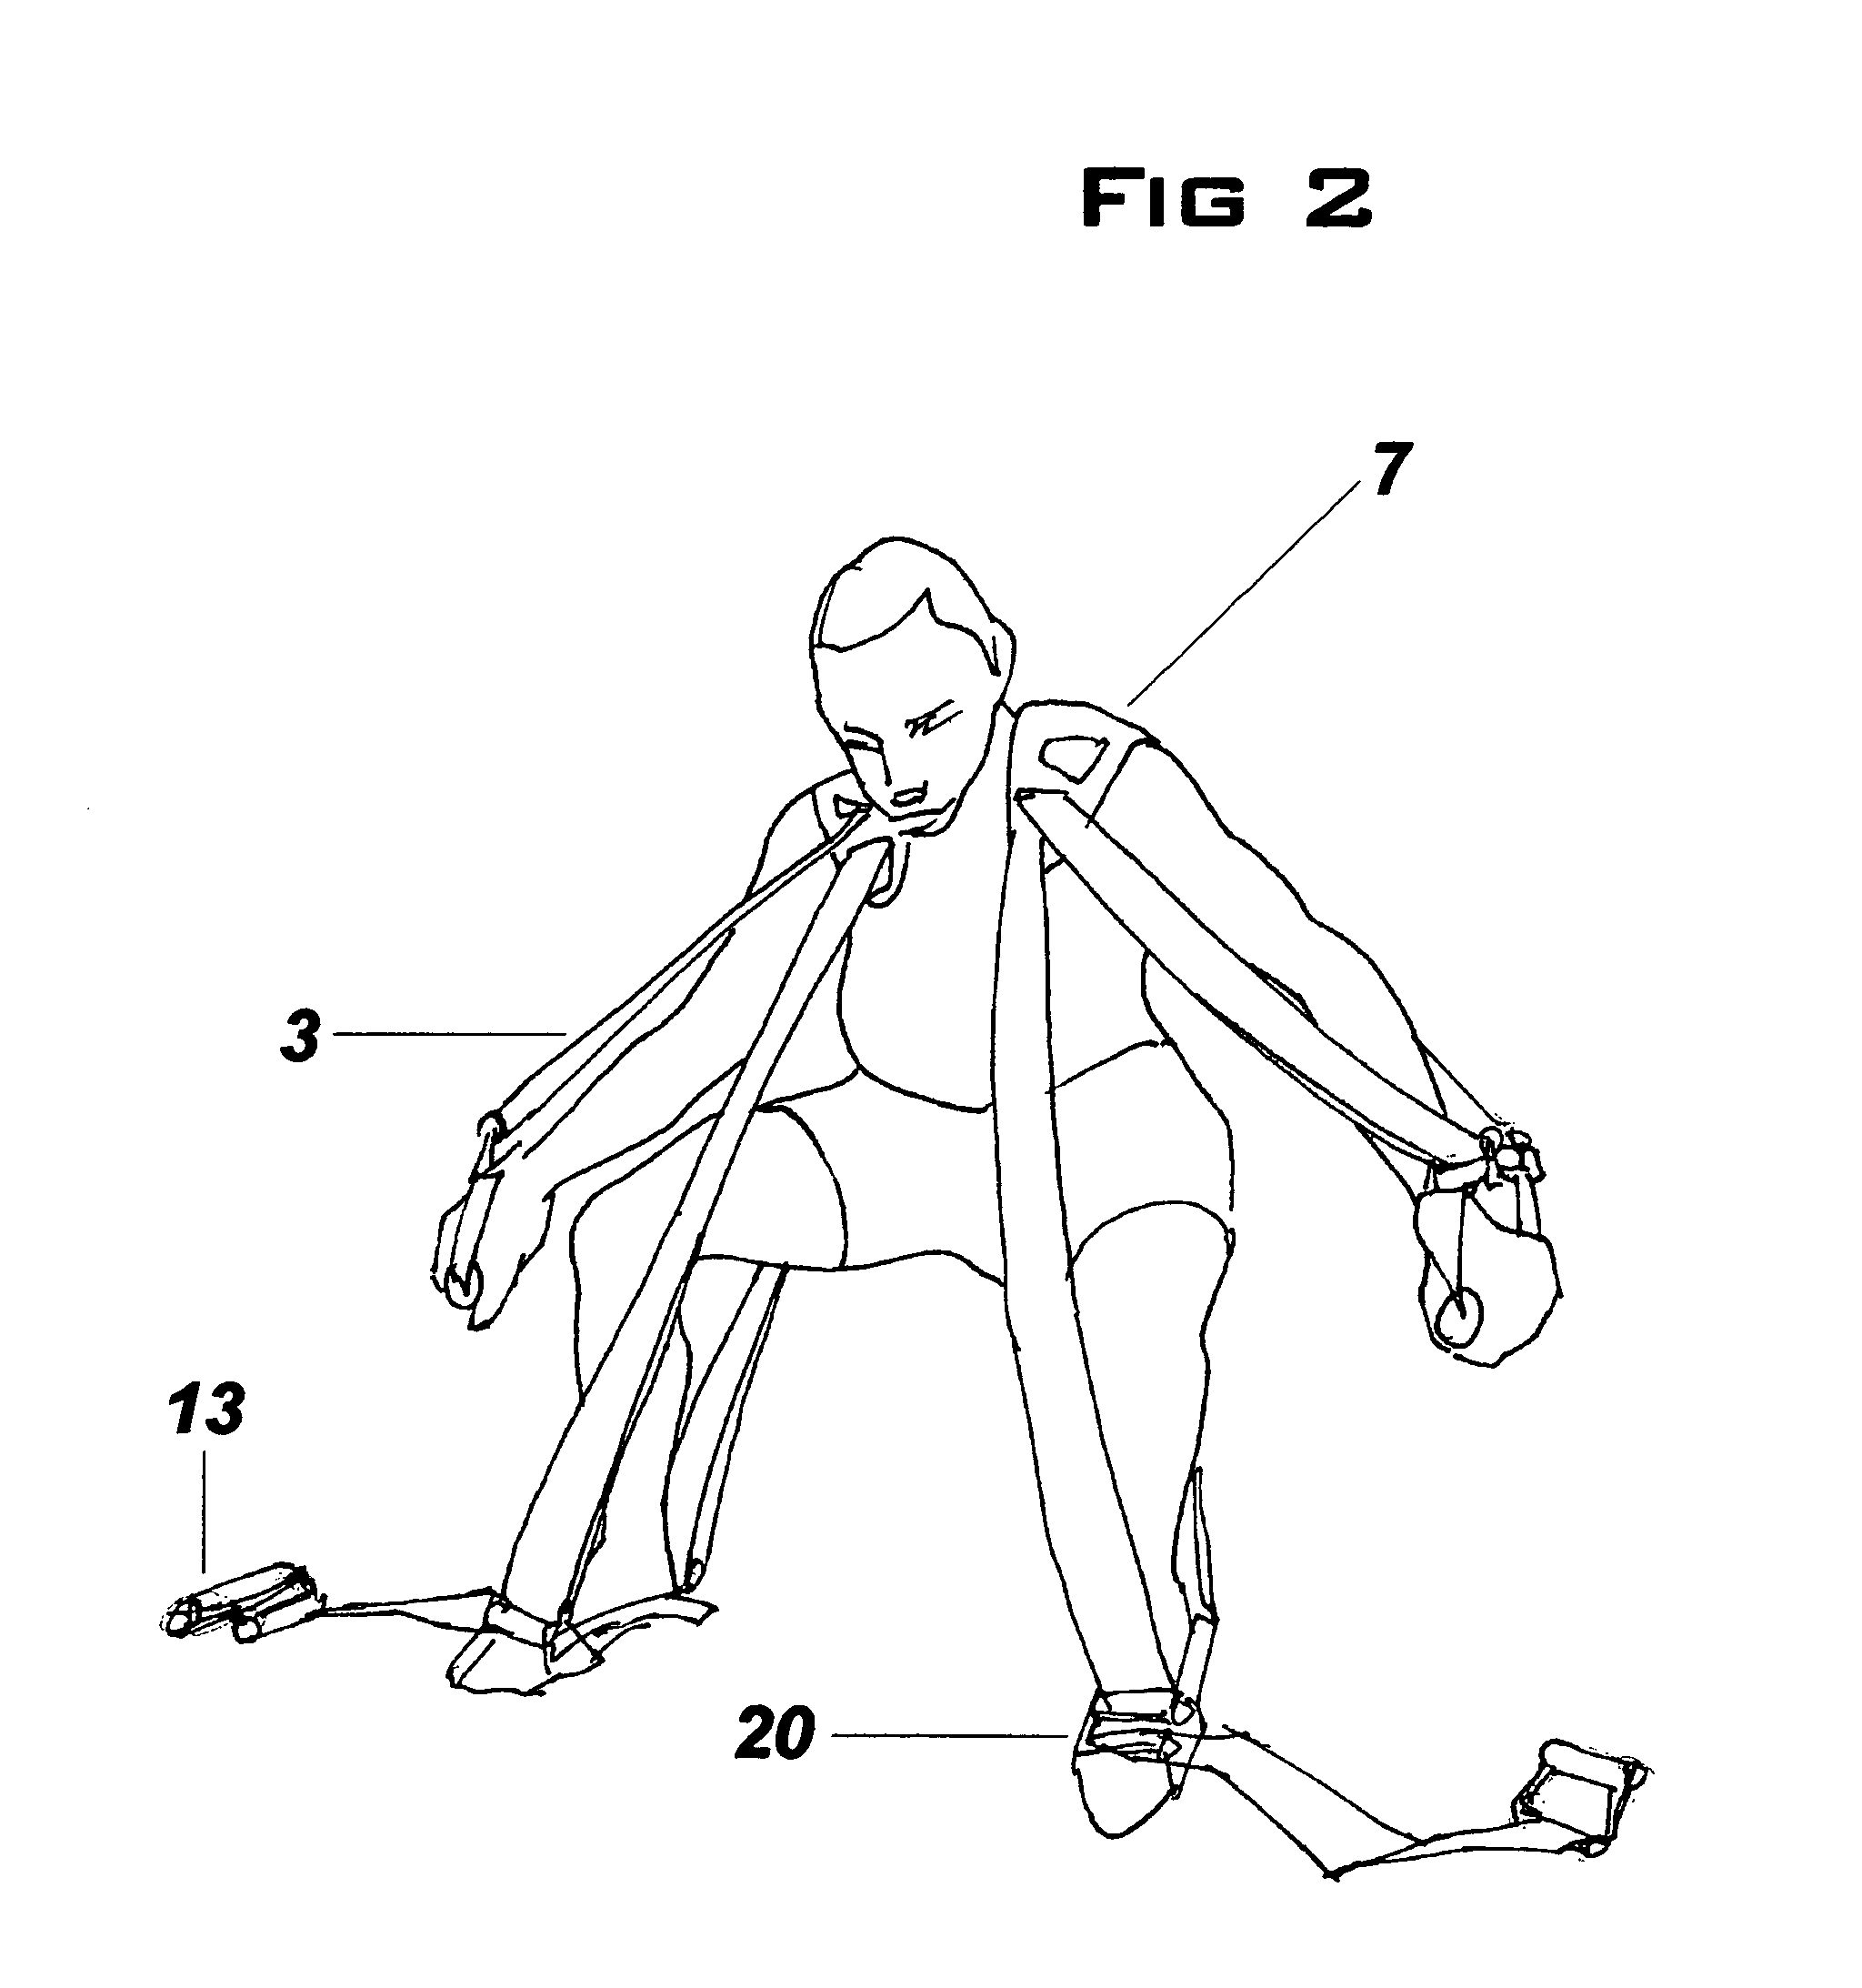 Rubber band musculoskeletal exercise device